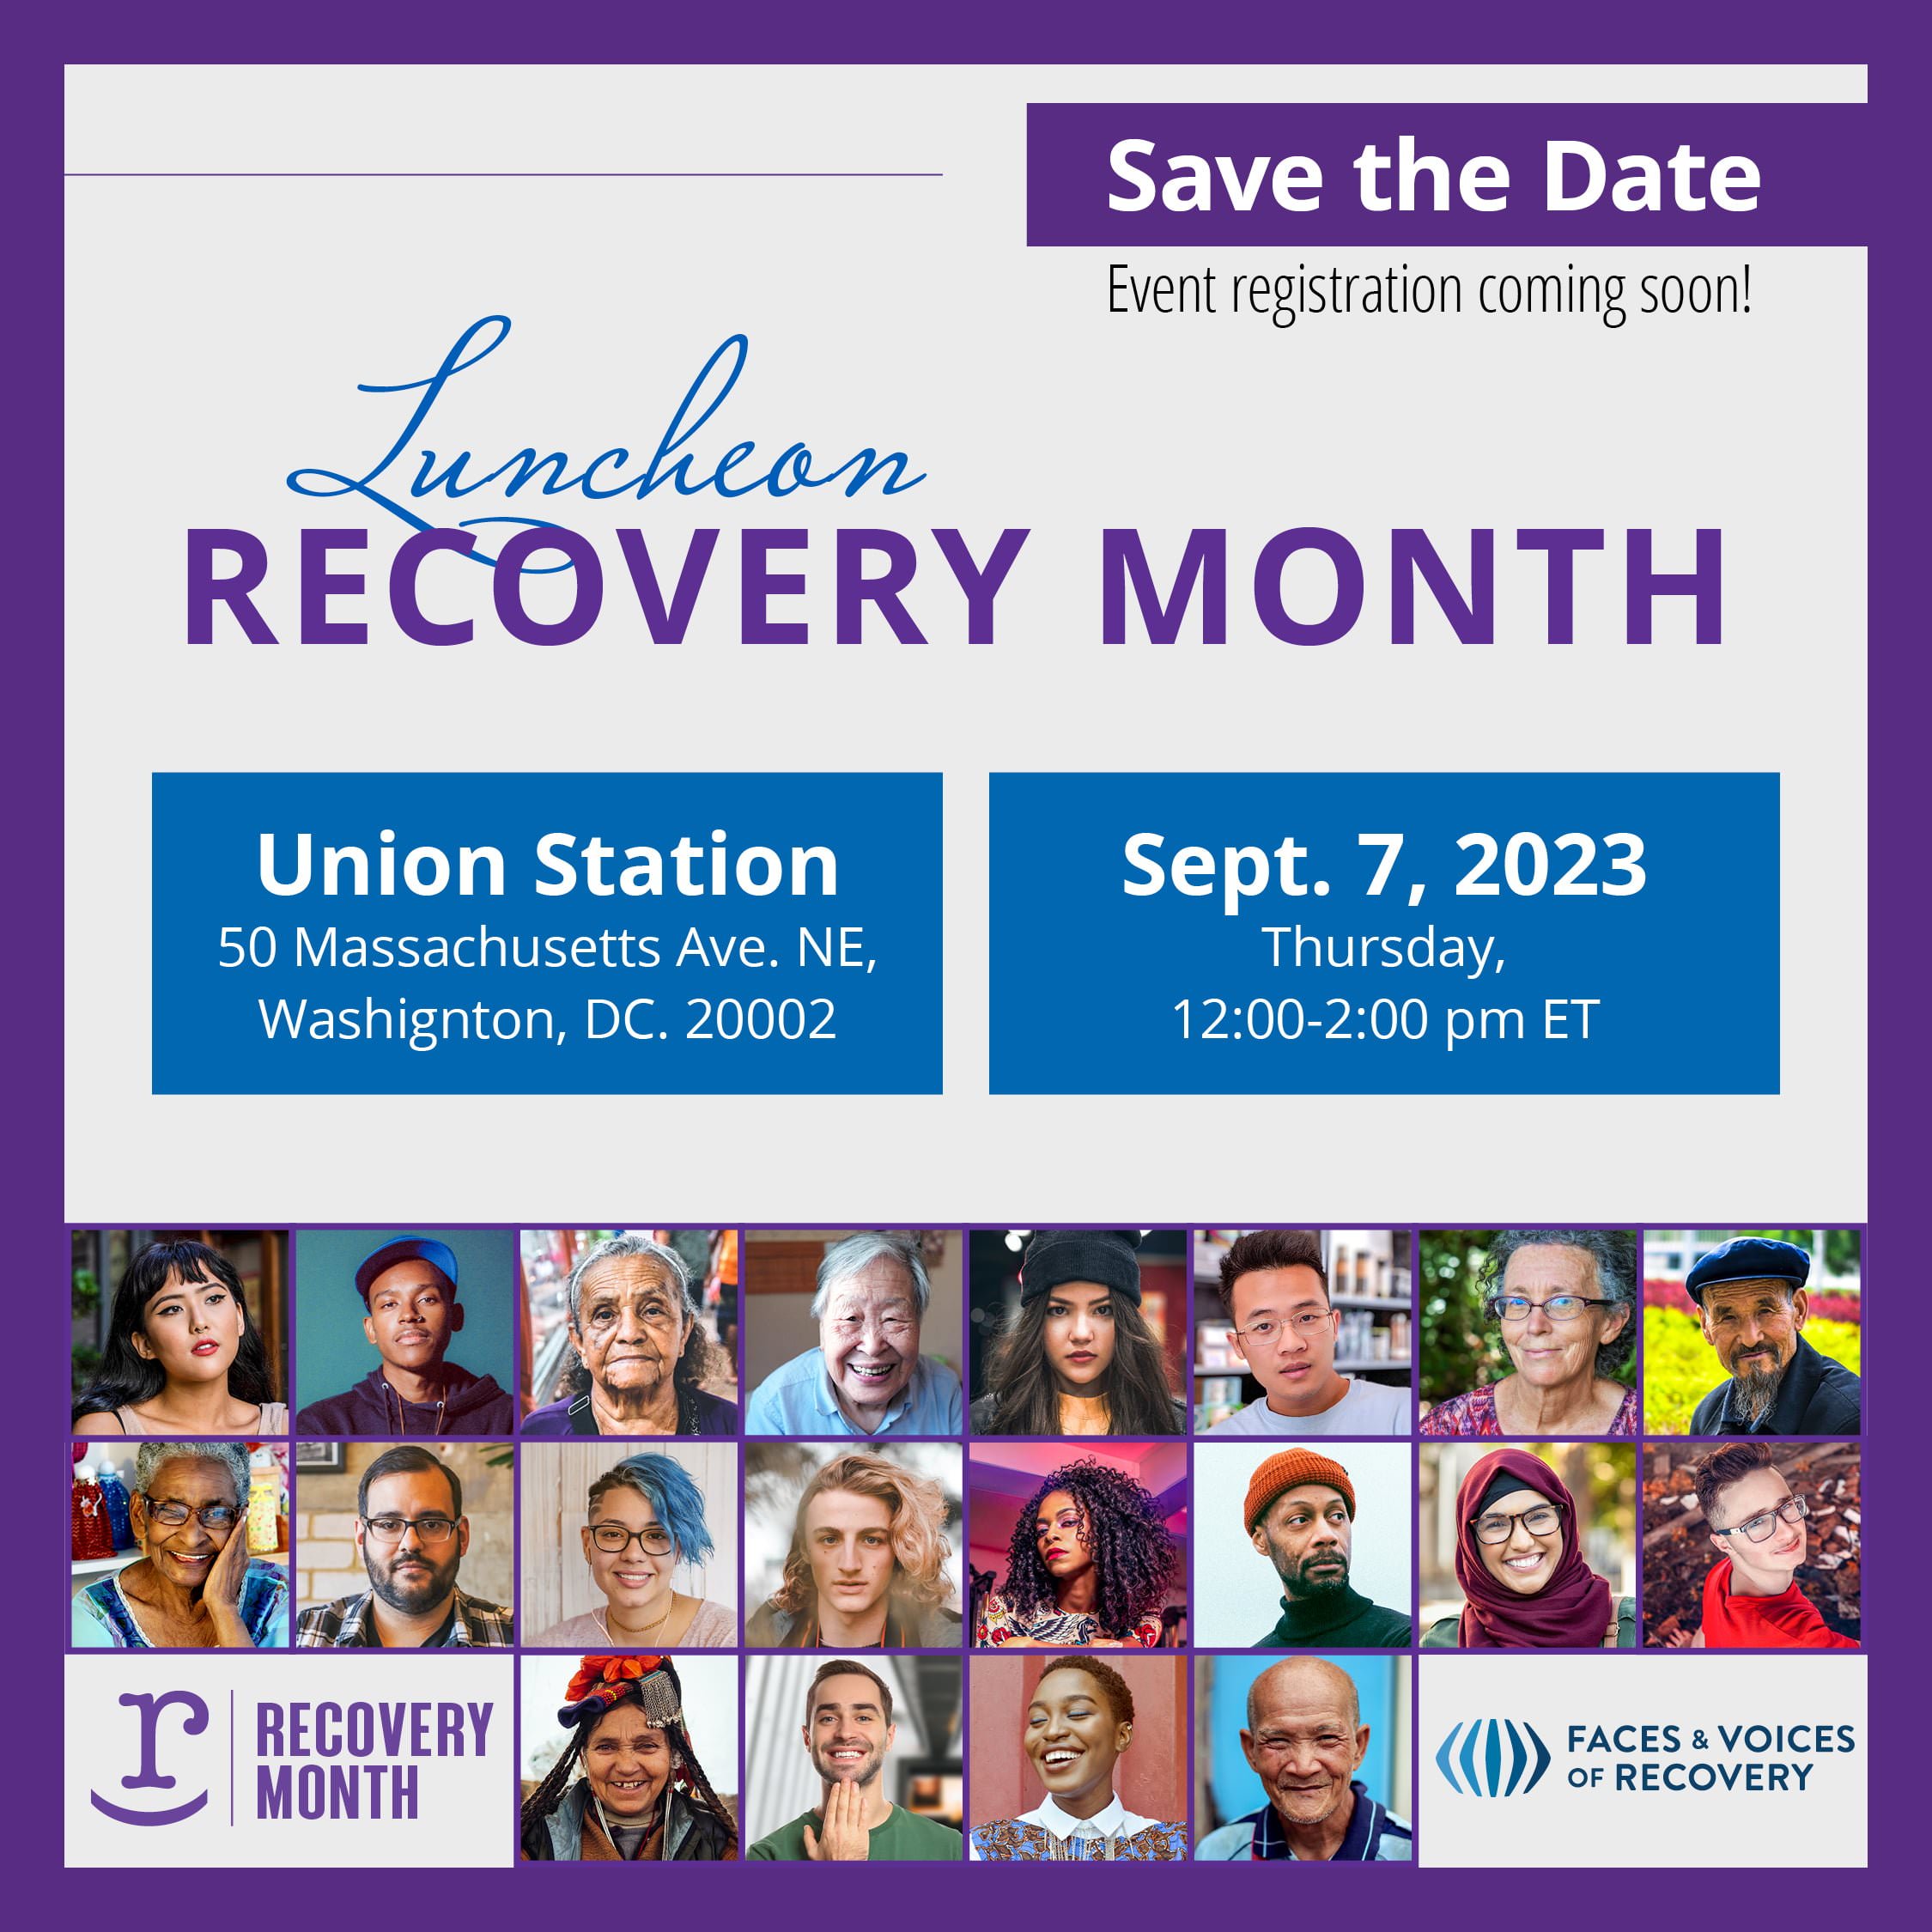 Luncheon Recovery Month Save the Date